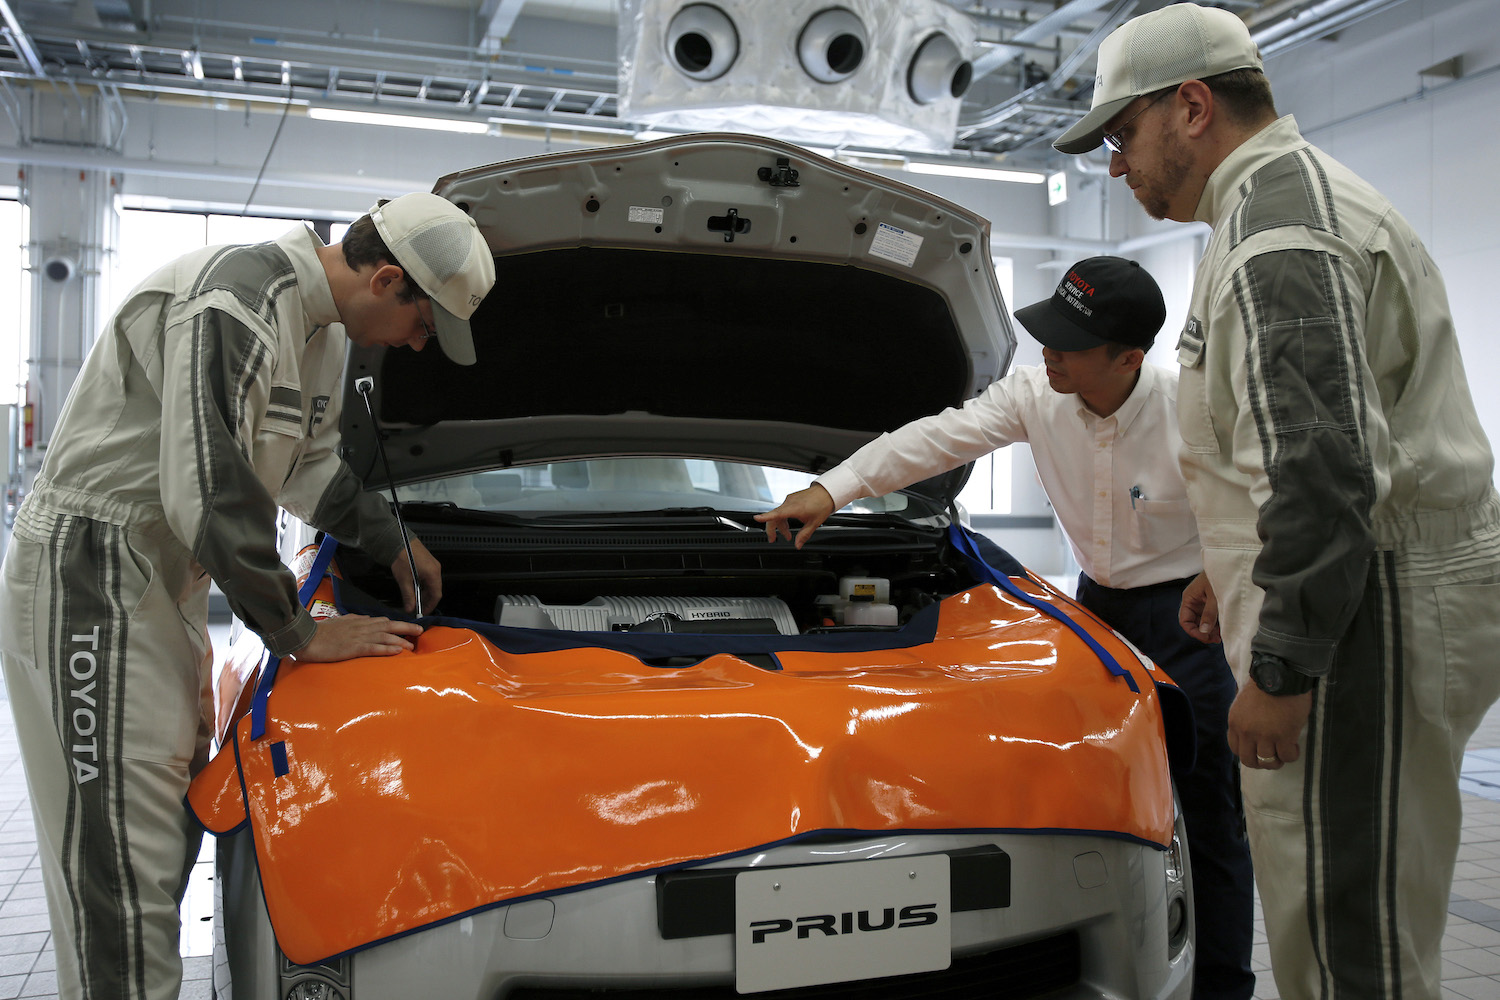 Trained Toyota dealer technicians learn how to replace a Prius high voltage hybrid battery.